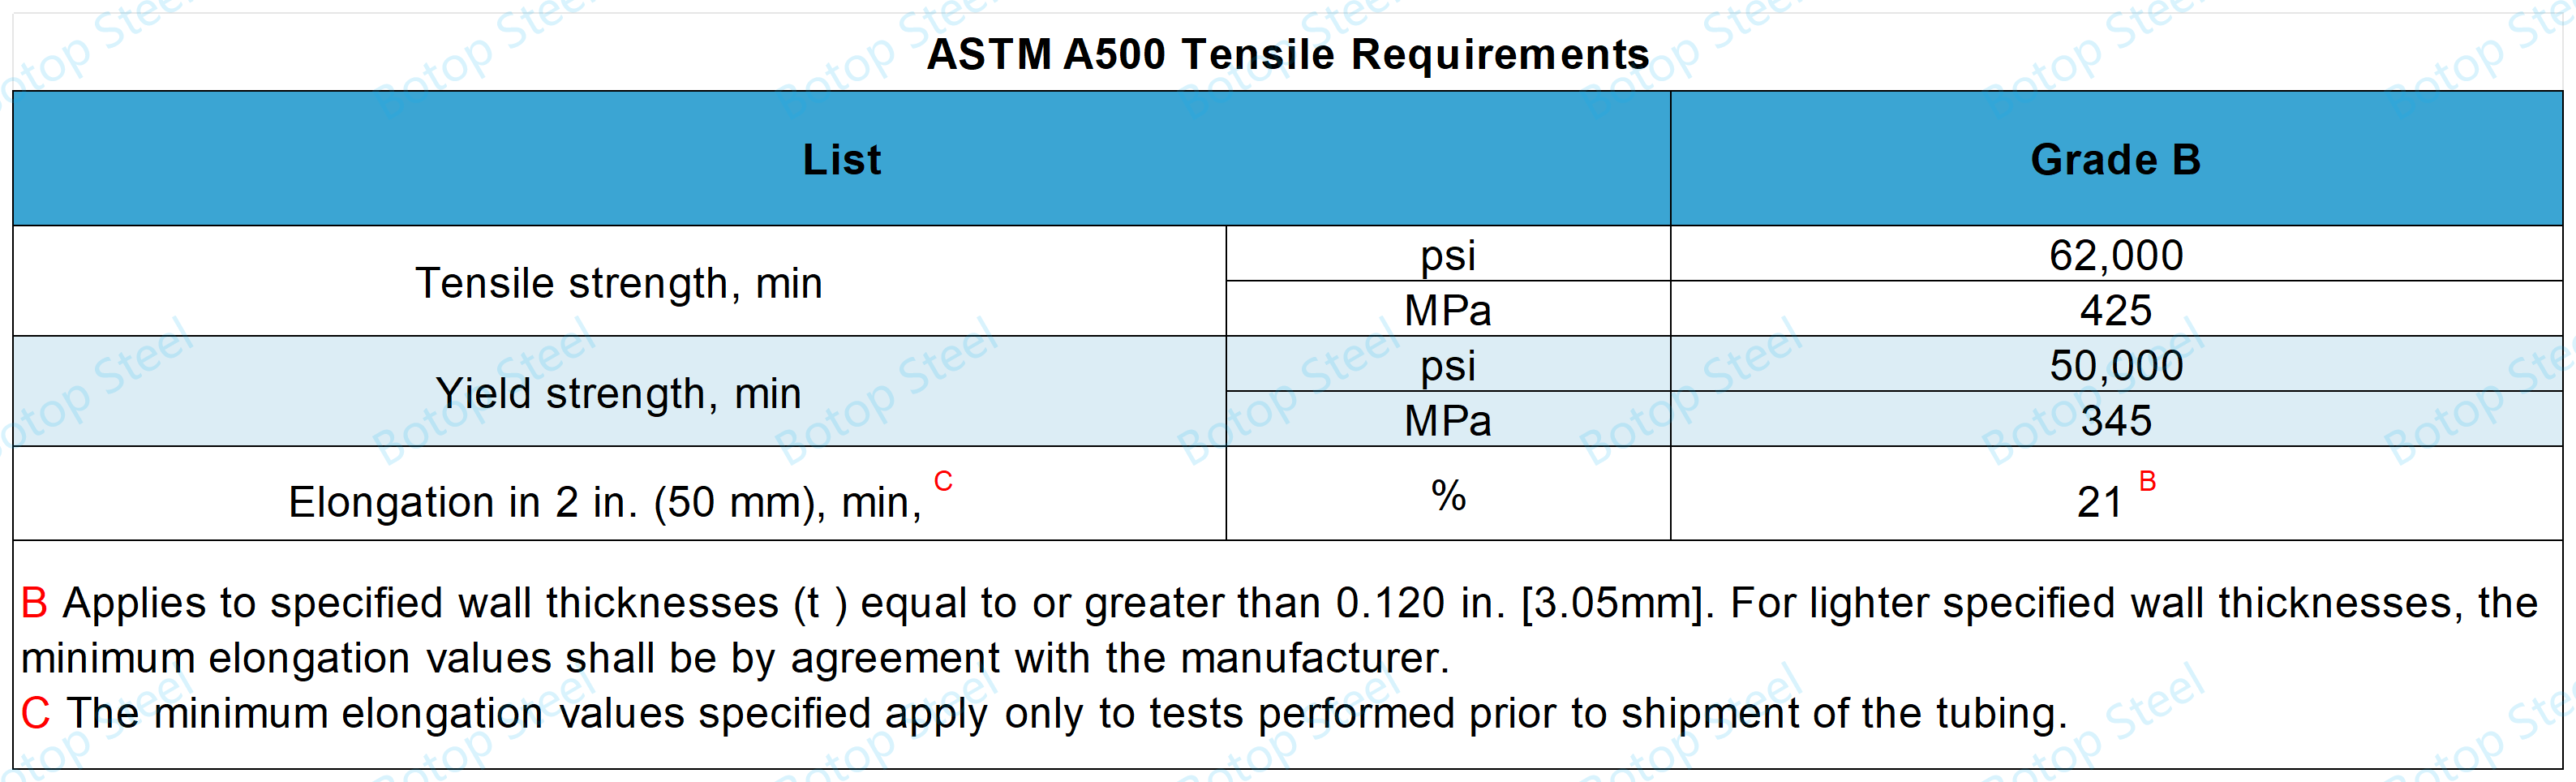 ASTM A500 Grade B_Tensile Requirements